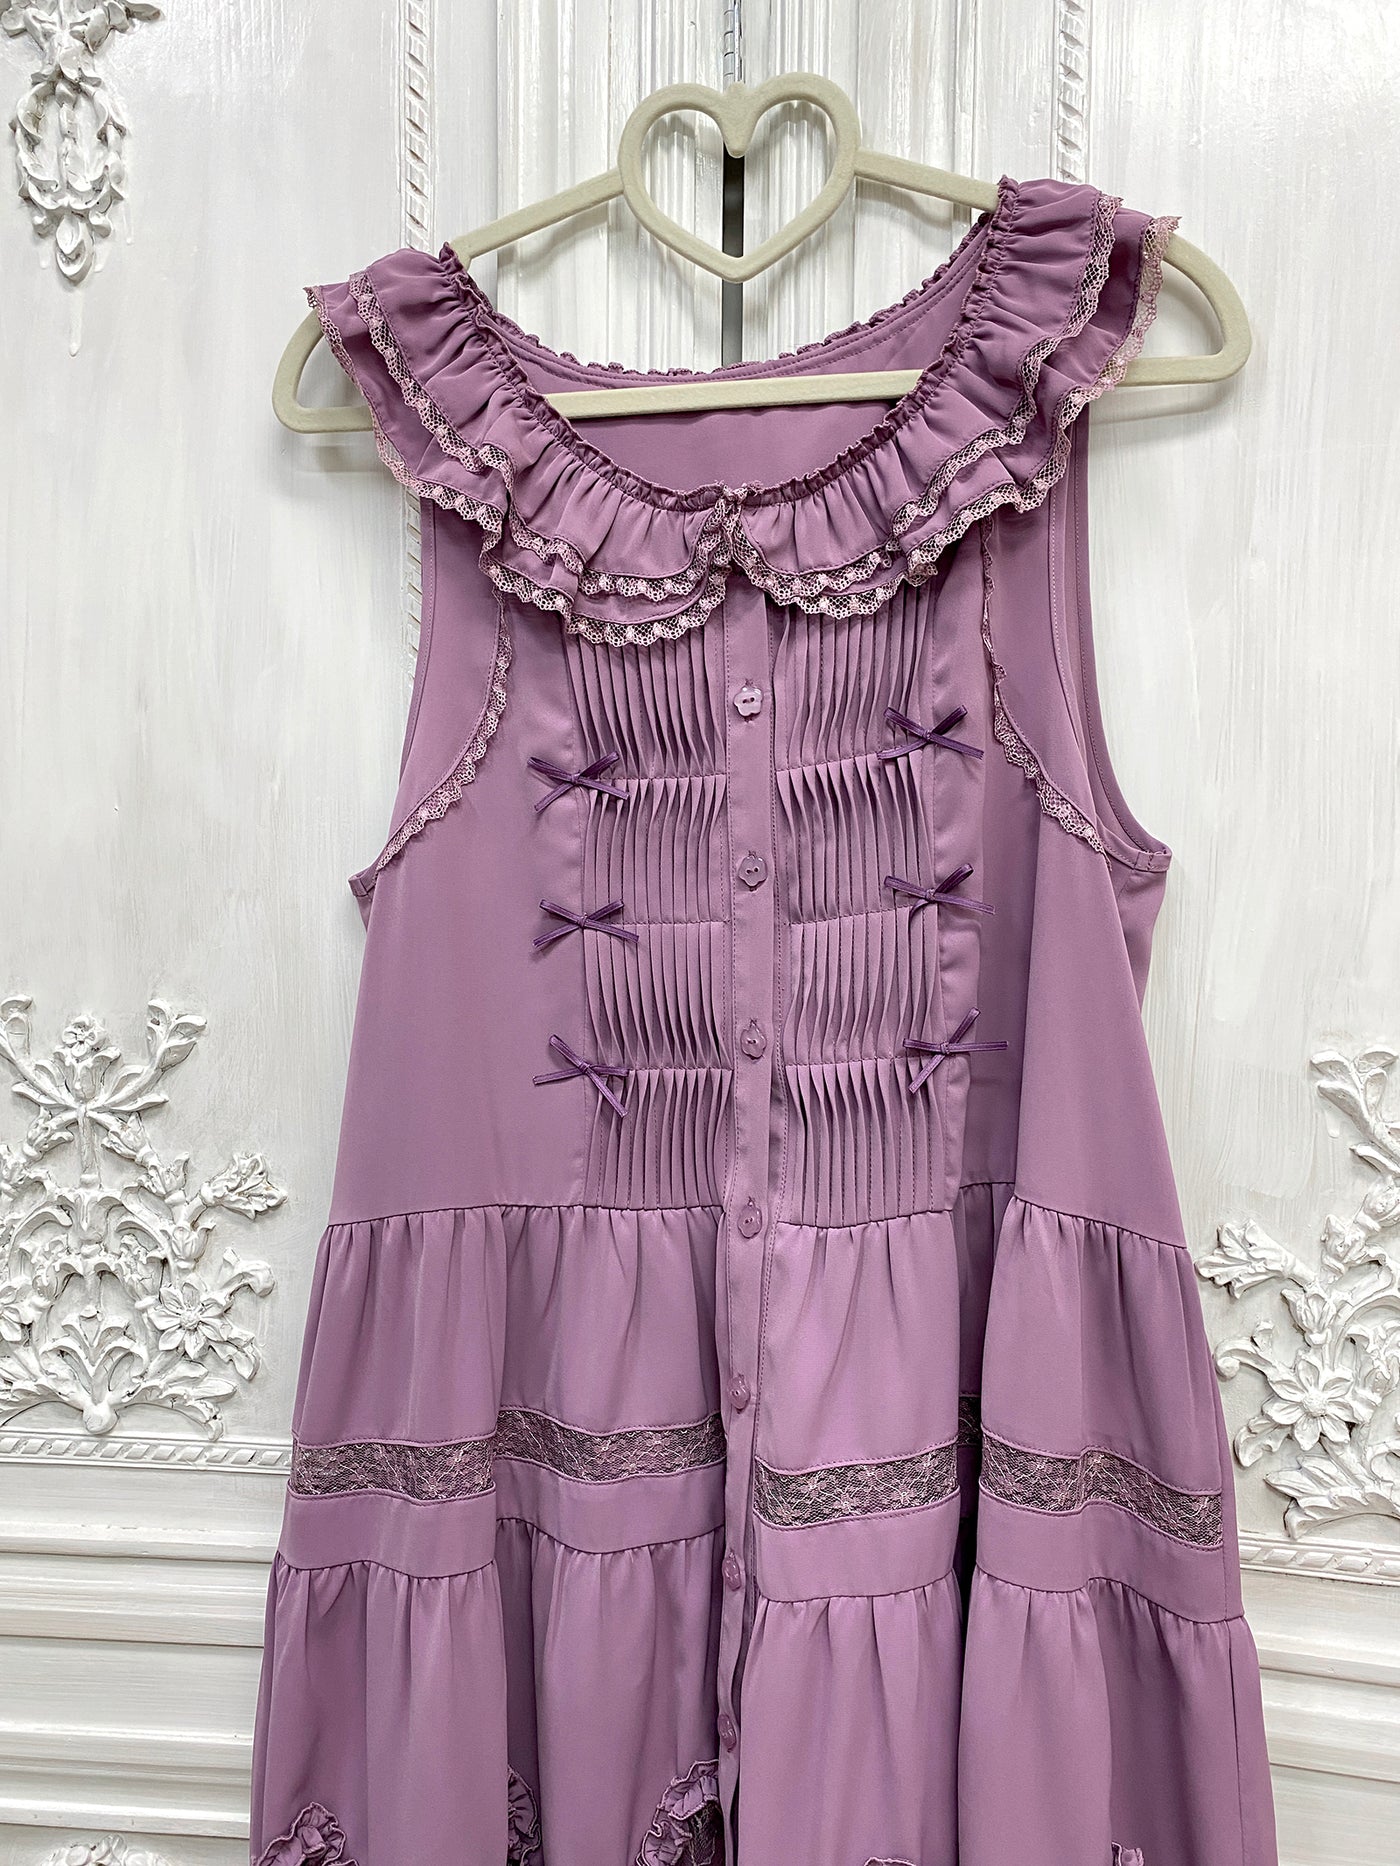 Little Dipper~Daily Lolita Hollowed-out Apron Dress Multicolors S gray-purple ( sleeveless) 